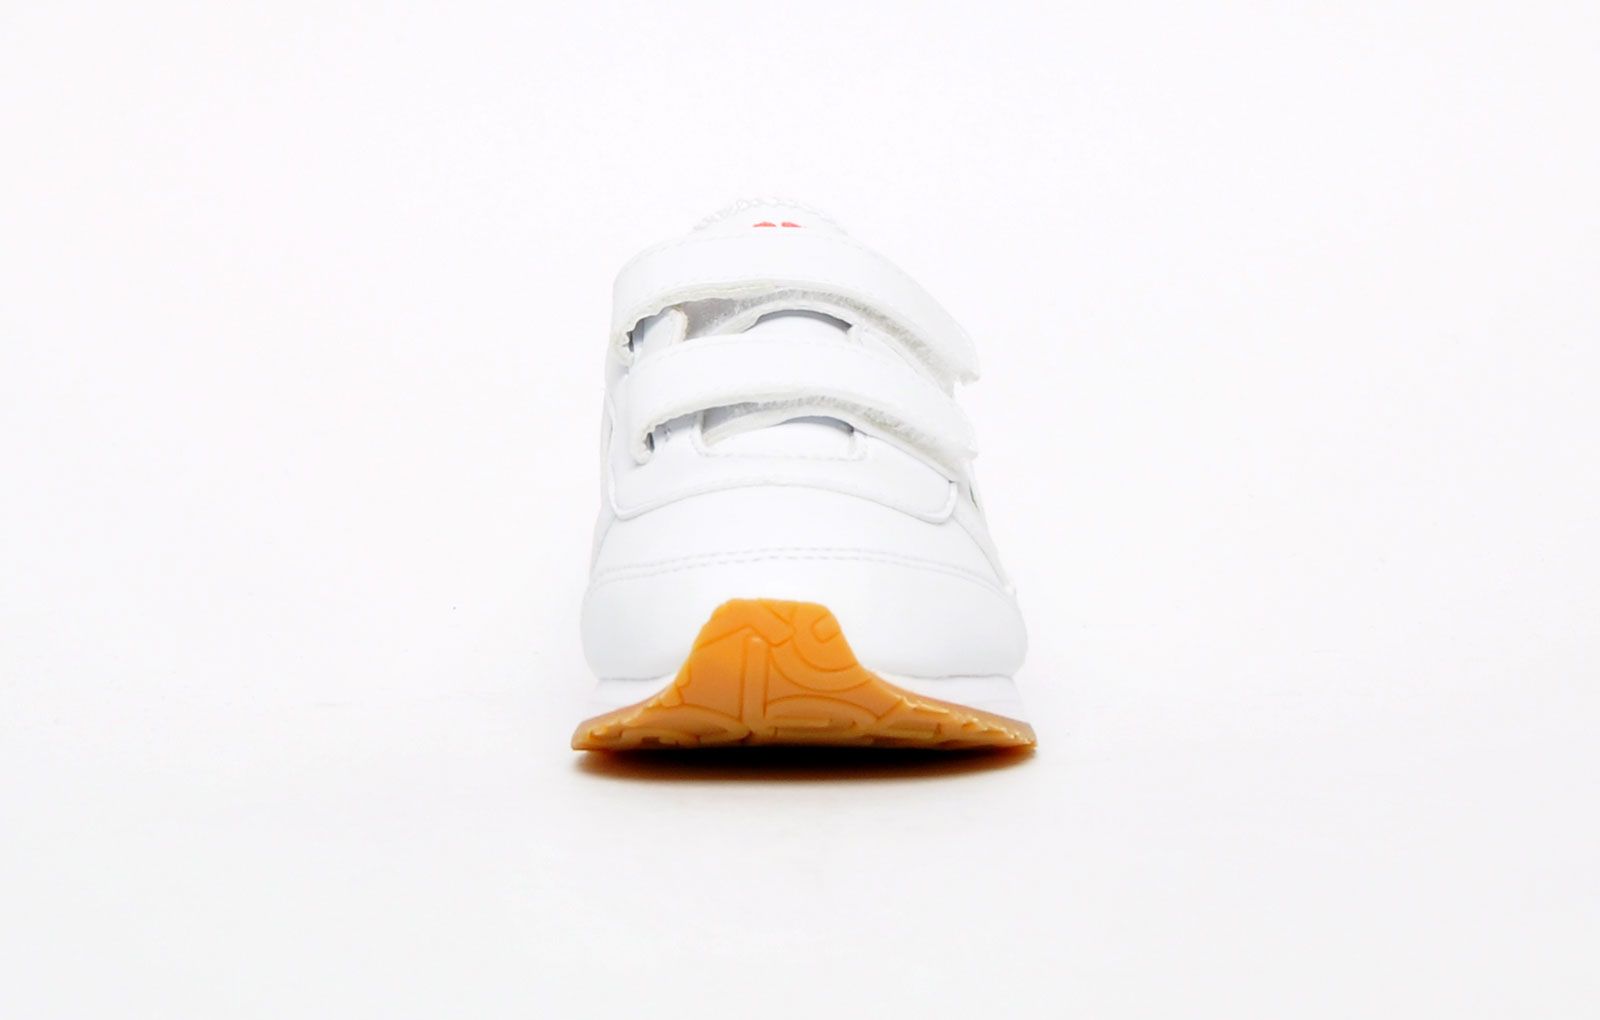 This timeless Lacoste Partner infant girls trainer oozes retro classic style featuring a synthetic upper with a secure hook and loop fastening system and low-cut padded collar to provide the ankle with freedom of movement.
 These on-trend chic trainers are delivered with a textile inner for that comfortable sock like feel and an ortholite padded insole to provide cushioning with every step you take, the Lacoste Partner is a cool classic trainer that will be sure to turn heads.
 - Synthetic upper
 - Hook and loop fastening for a secure fit
 - Textile lining
 - Ortholite insoles
 - Durable rubber outsole
 - Soft padded heel and ankle collar
 - Lacoste branding throughout
 Please Note:
 These Lacoste trainers are sold as B grades which means there may be some very slight cosmetic issues on the shoe and they come in a Lacoste box with the Lacoste brand authenticity details attached to it. We have checked every pair of these shoes and in our opinion at these heavily reduced prices all are very saleable. All shoes are guaranteed against fair wear and tear and offer a substantial saving against the normal high street price. The overall function or performance of the shoe will not be affected by cosmetic issues. B Grades are original authentic products released by the brand manufacturer with their approval at greatly reduced prices. If you are unhappy with your purchase we will be more than happy to take the shoes back from you and issue a full refund